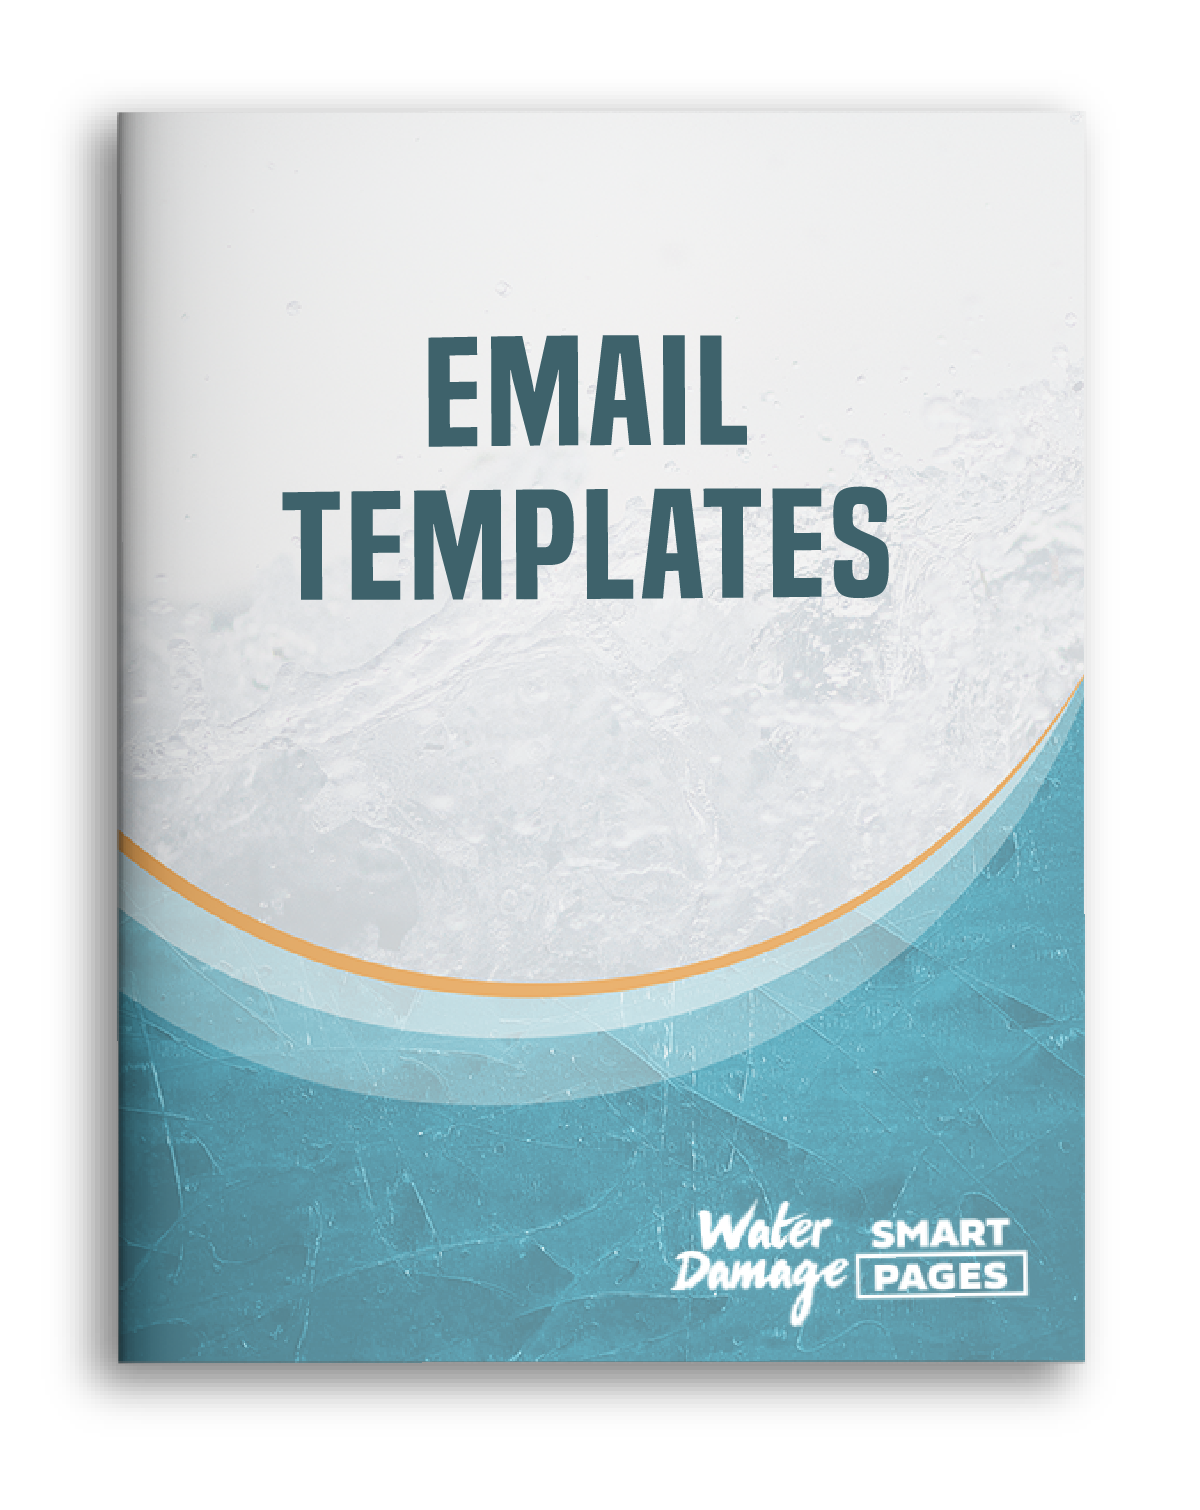 email templates Flood Your Brand New Water Damage Customer With 257% More Leads!